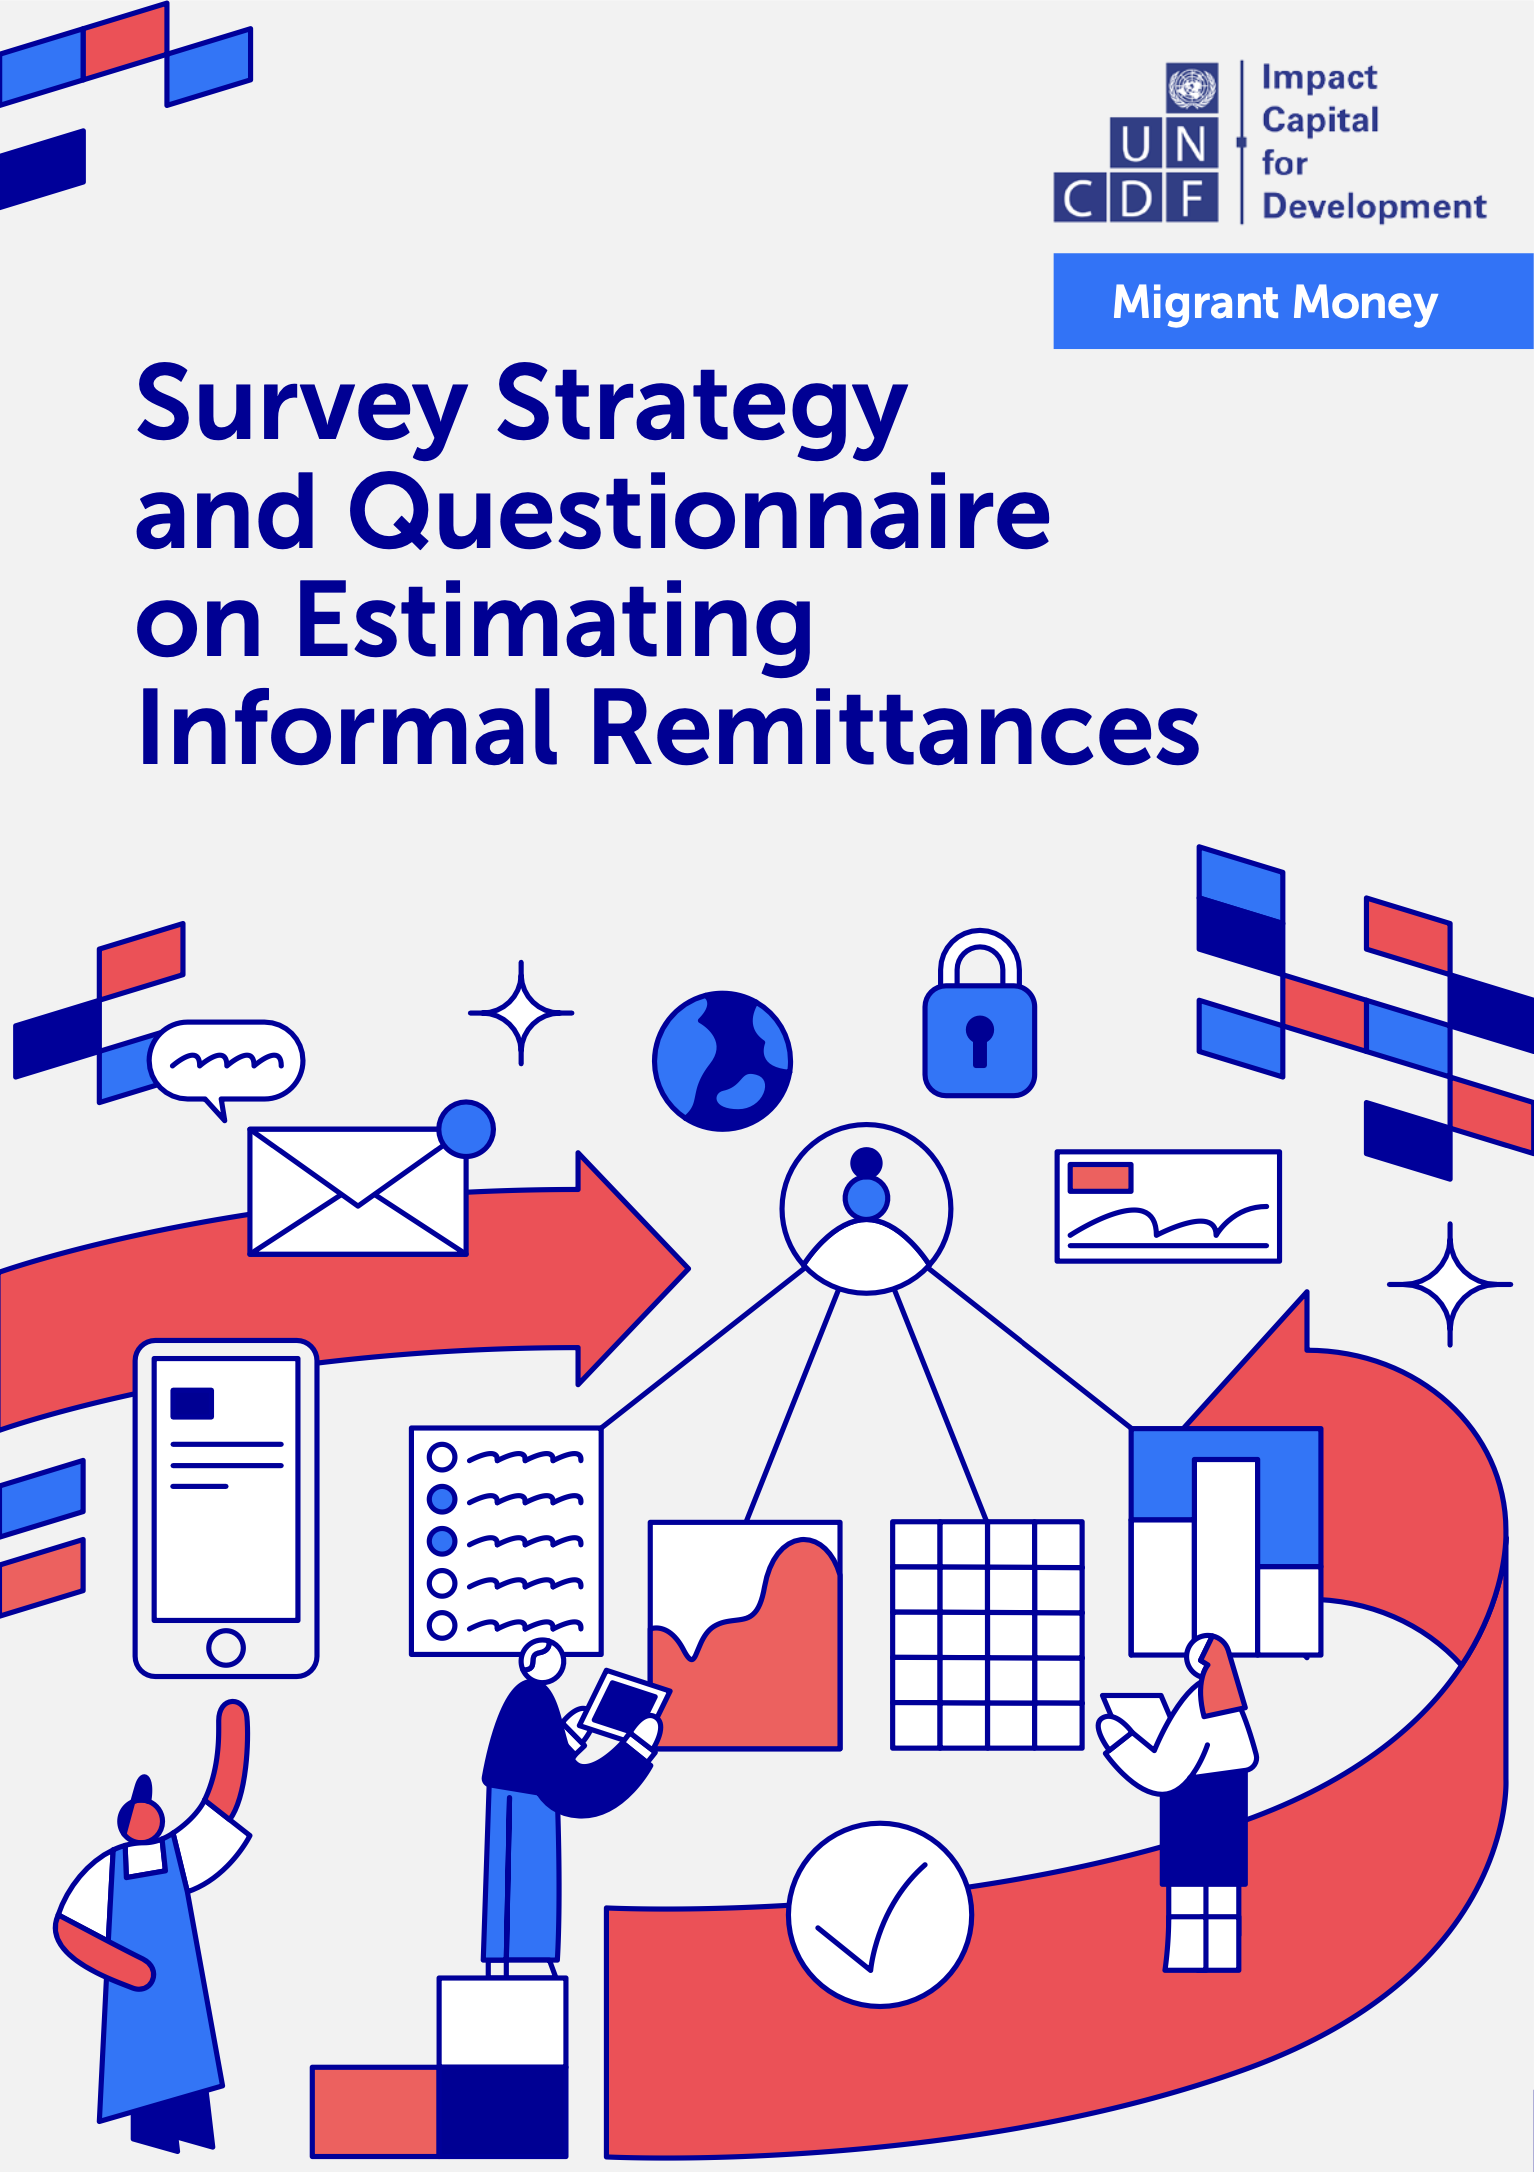 Survey Strategy and Questionnaire on Estimating Informal Remittances